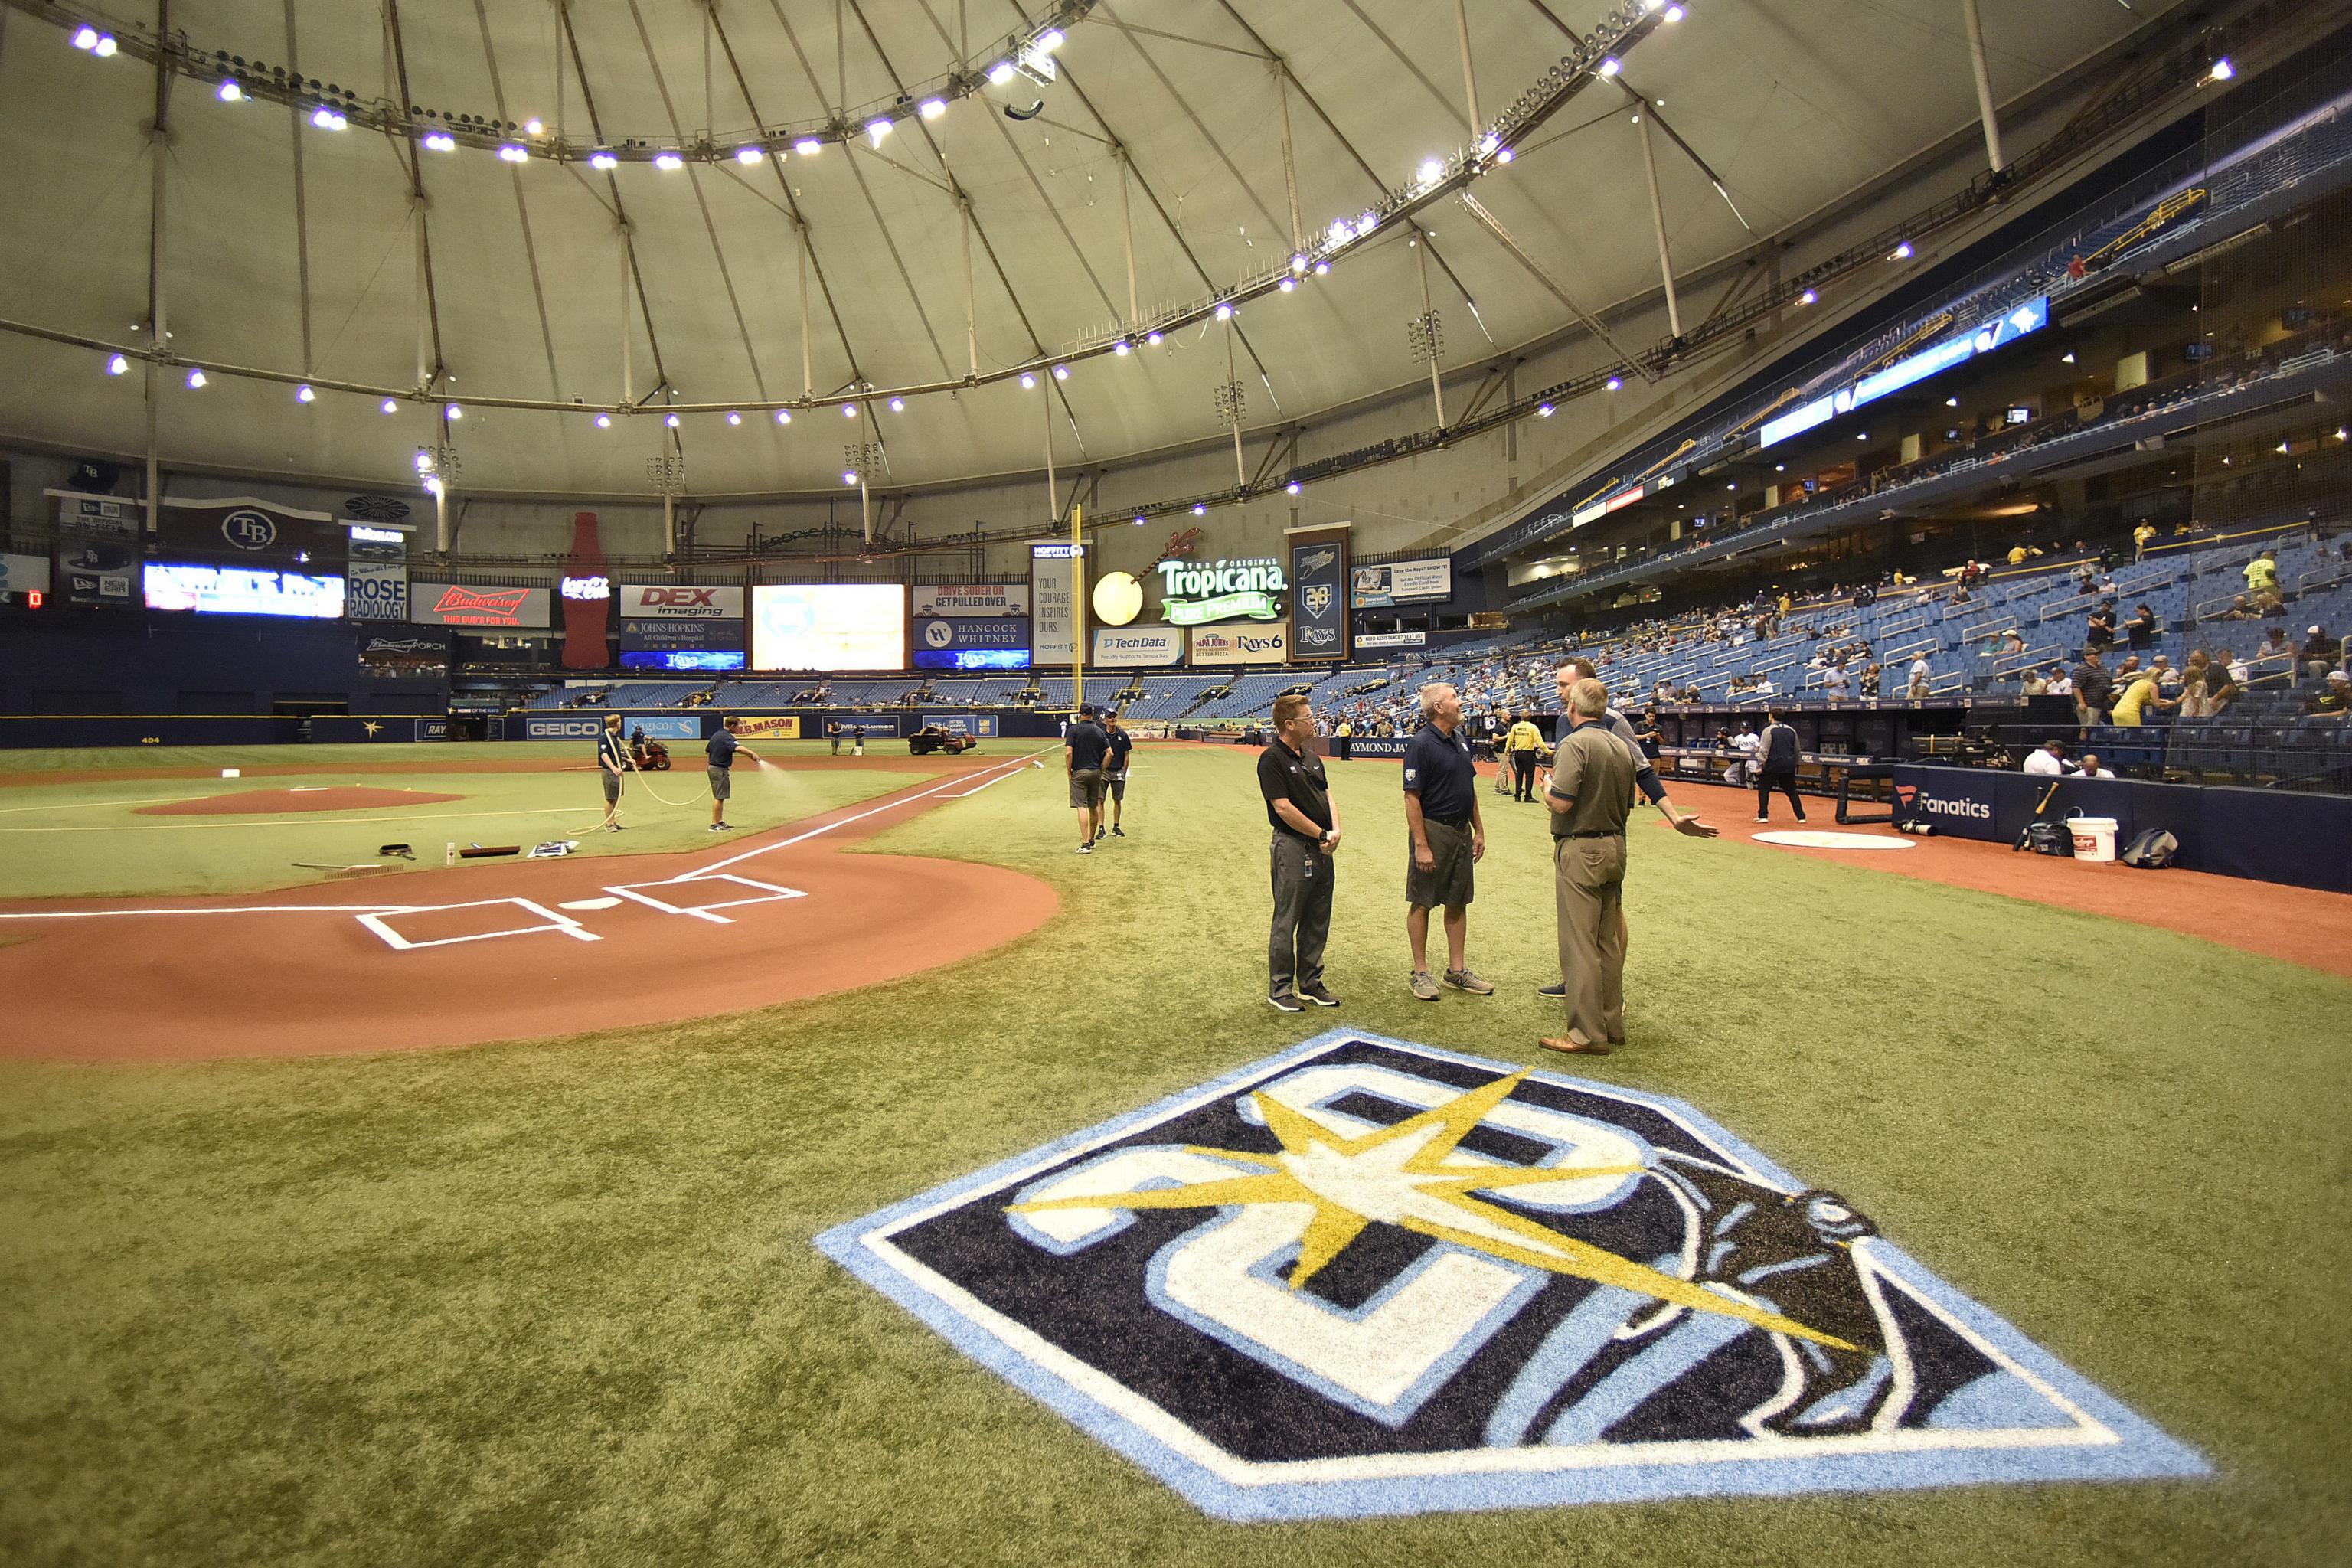 Rays Closing Upper Deck at Tropicana Field to Create 'Intimate